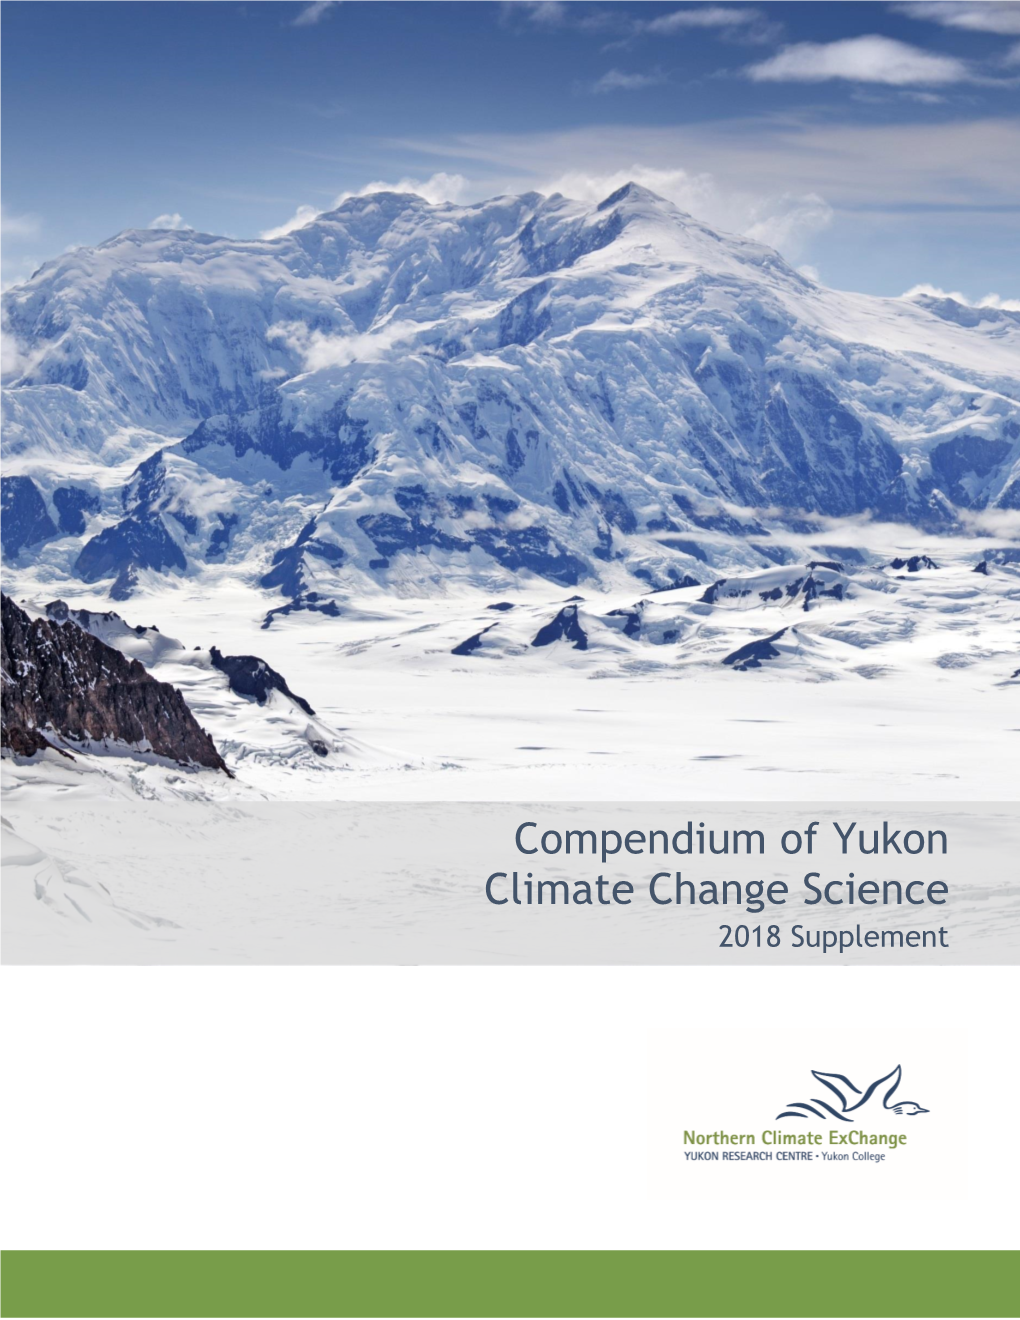 Compendium of Yukon Climate Change Science 2018 Supplement